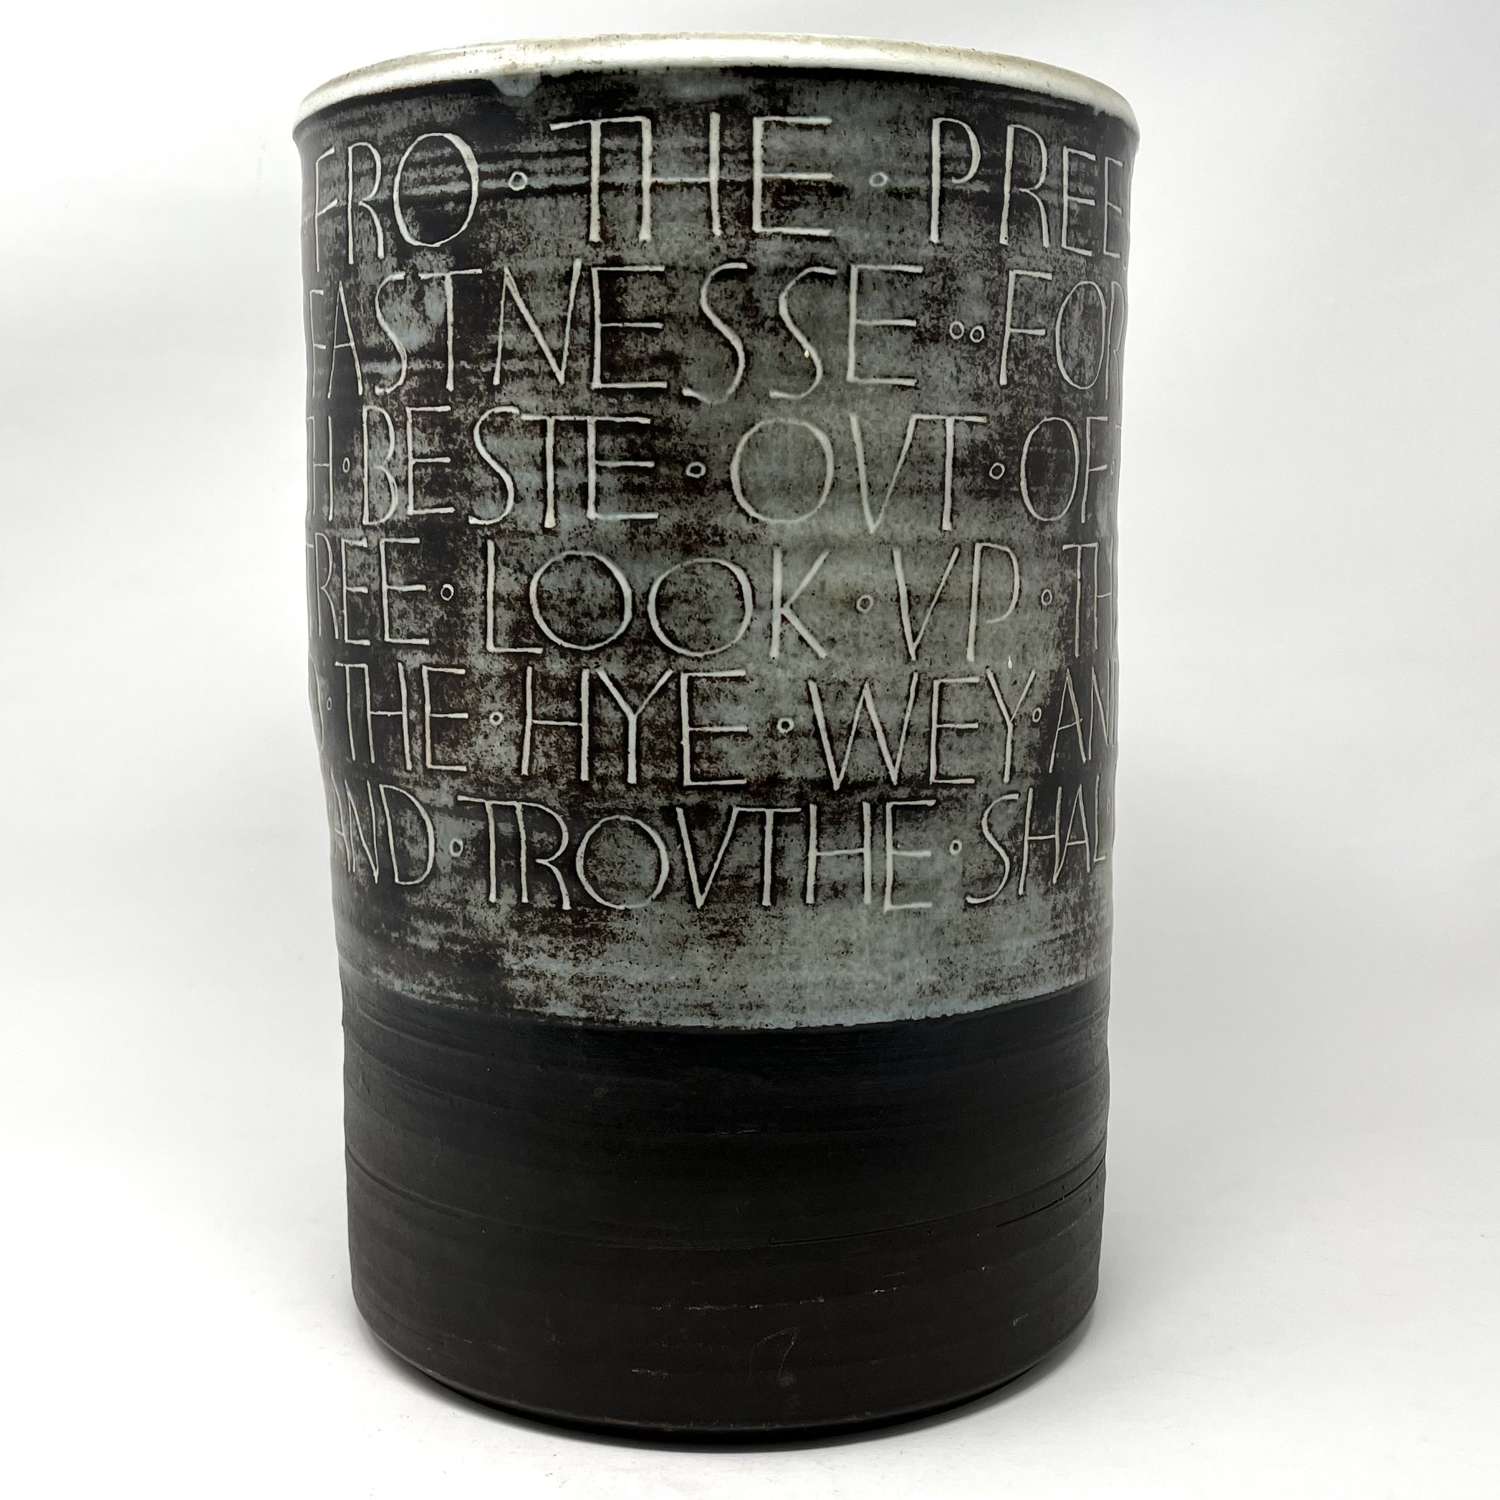 Peter Wright large tin glazed earthenware vessel text from Chaucer